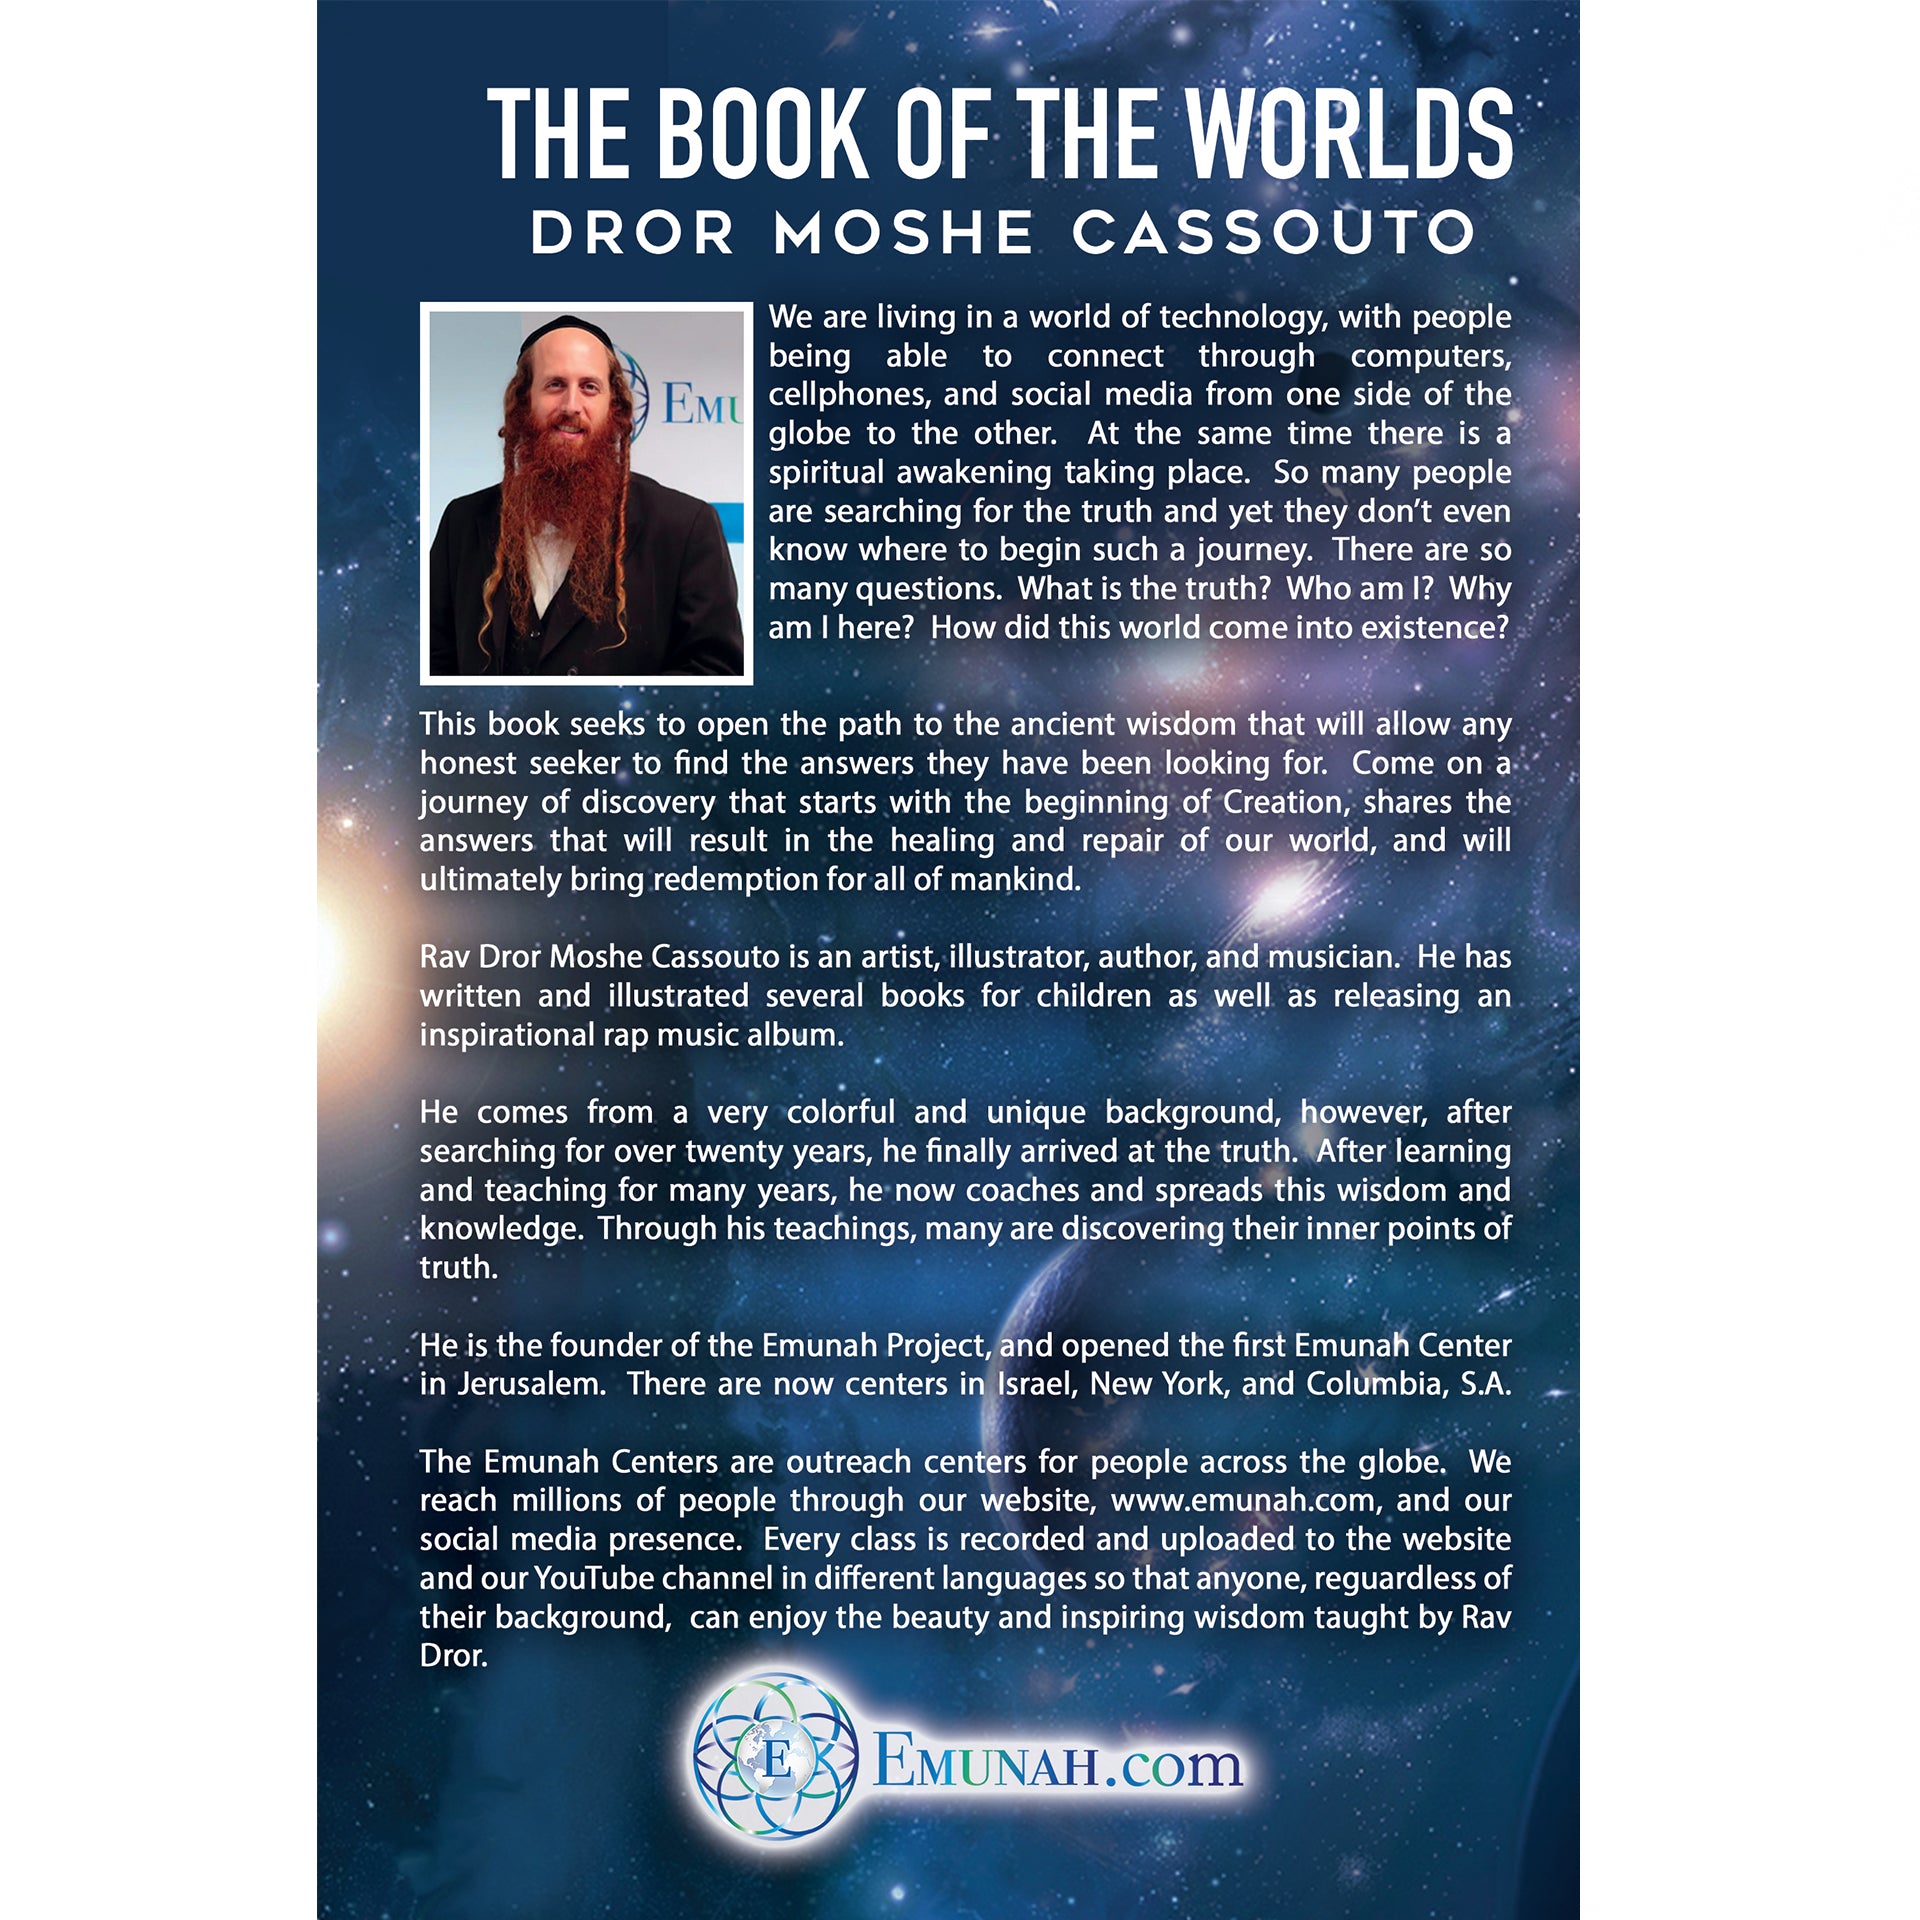 Book of The Worlds by Rav Dror Paperback